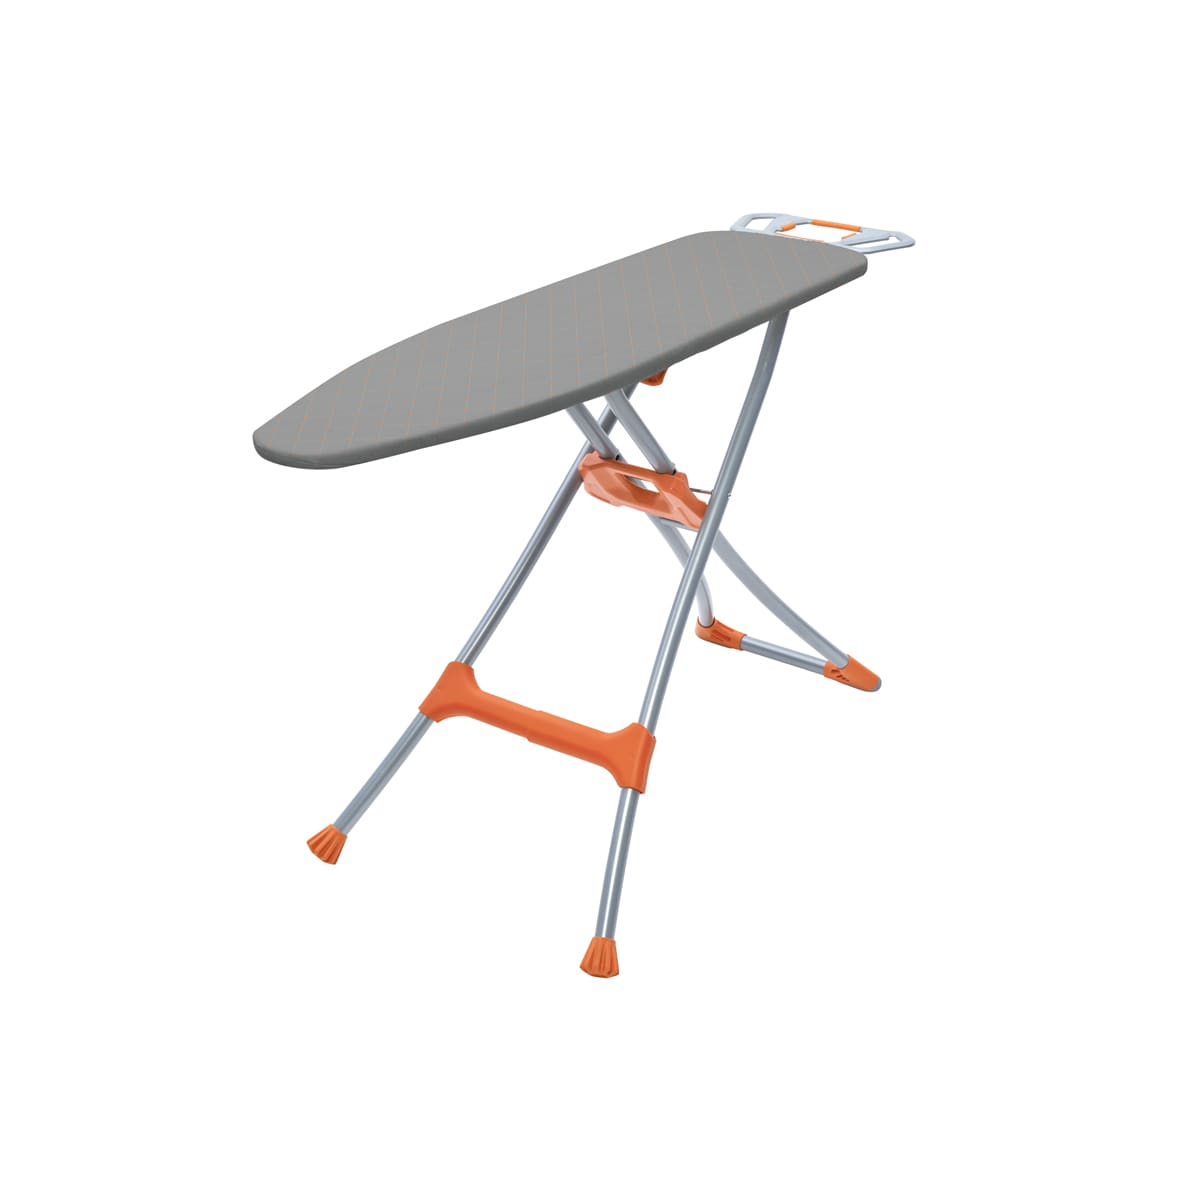 Cream Details about   Homz Professional Wide-Top Ironing Board 